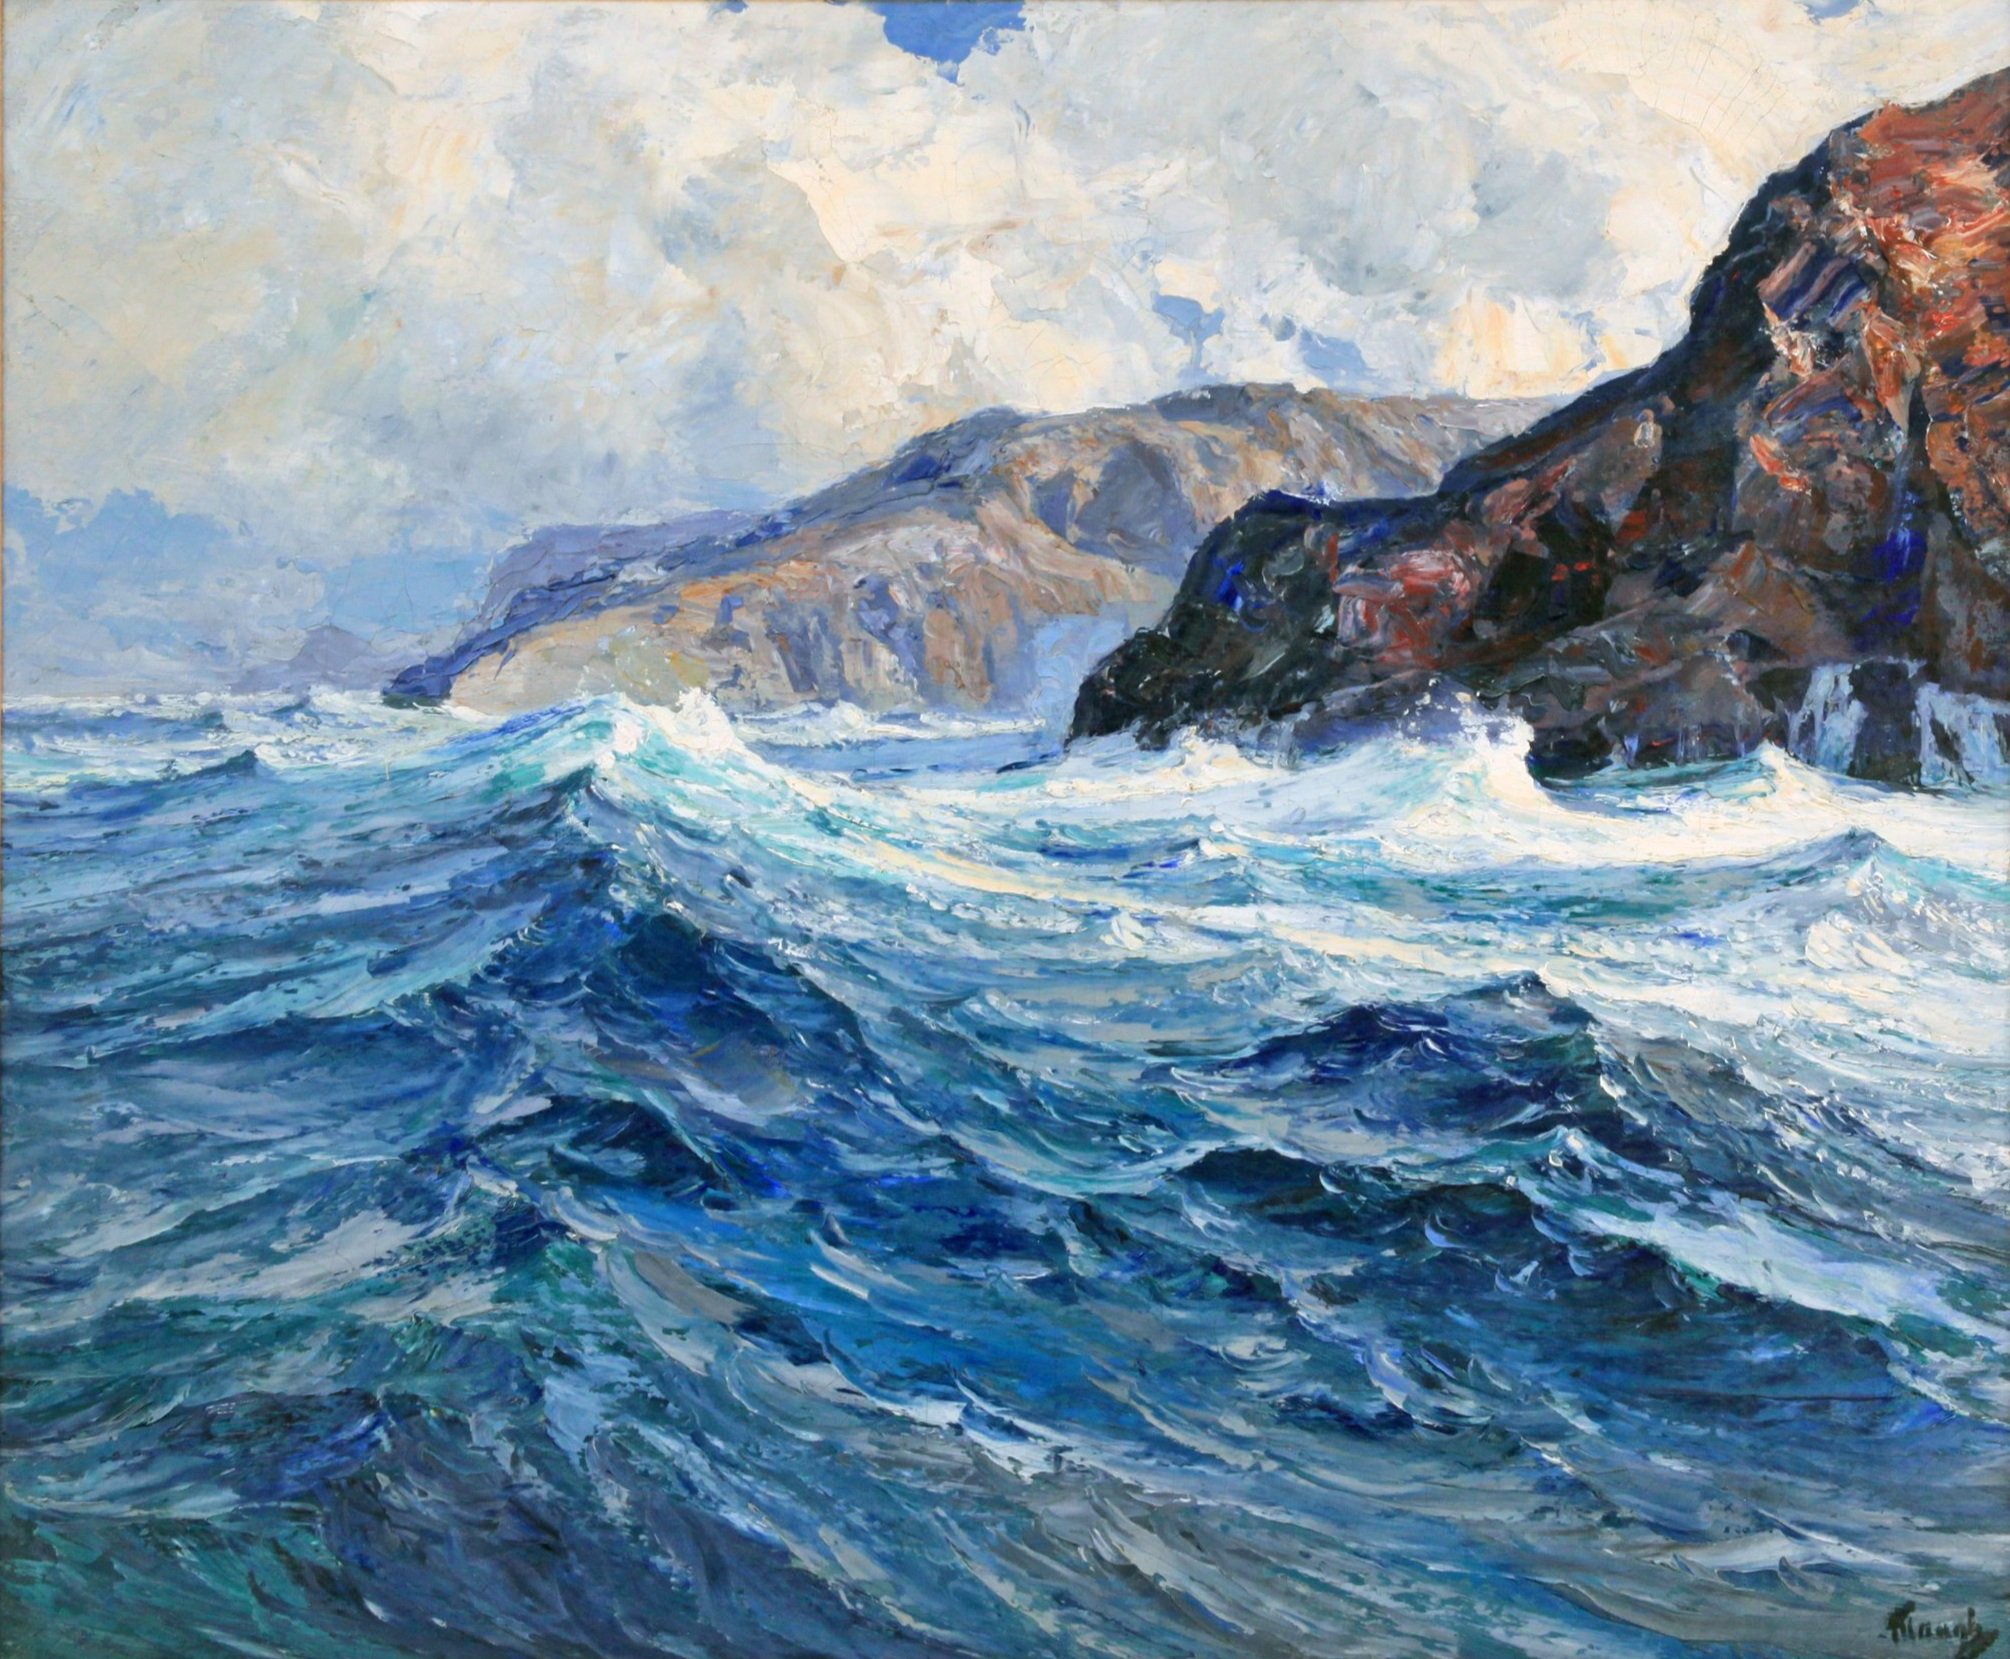  Feature Consignment:  Lot 161 - Frederick J. Waugh (1861-1940)   Headlands  oil on canvas, 25 x 30 in. 